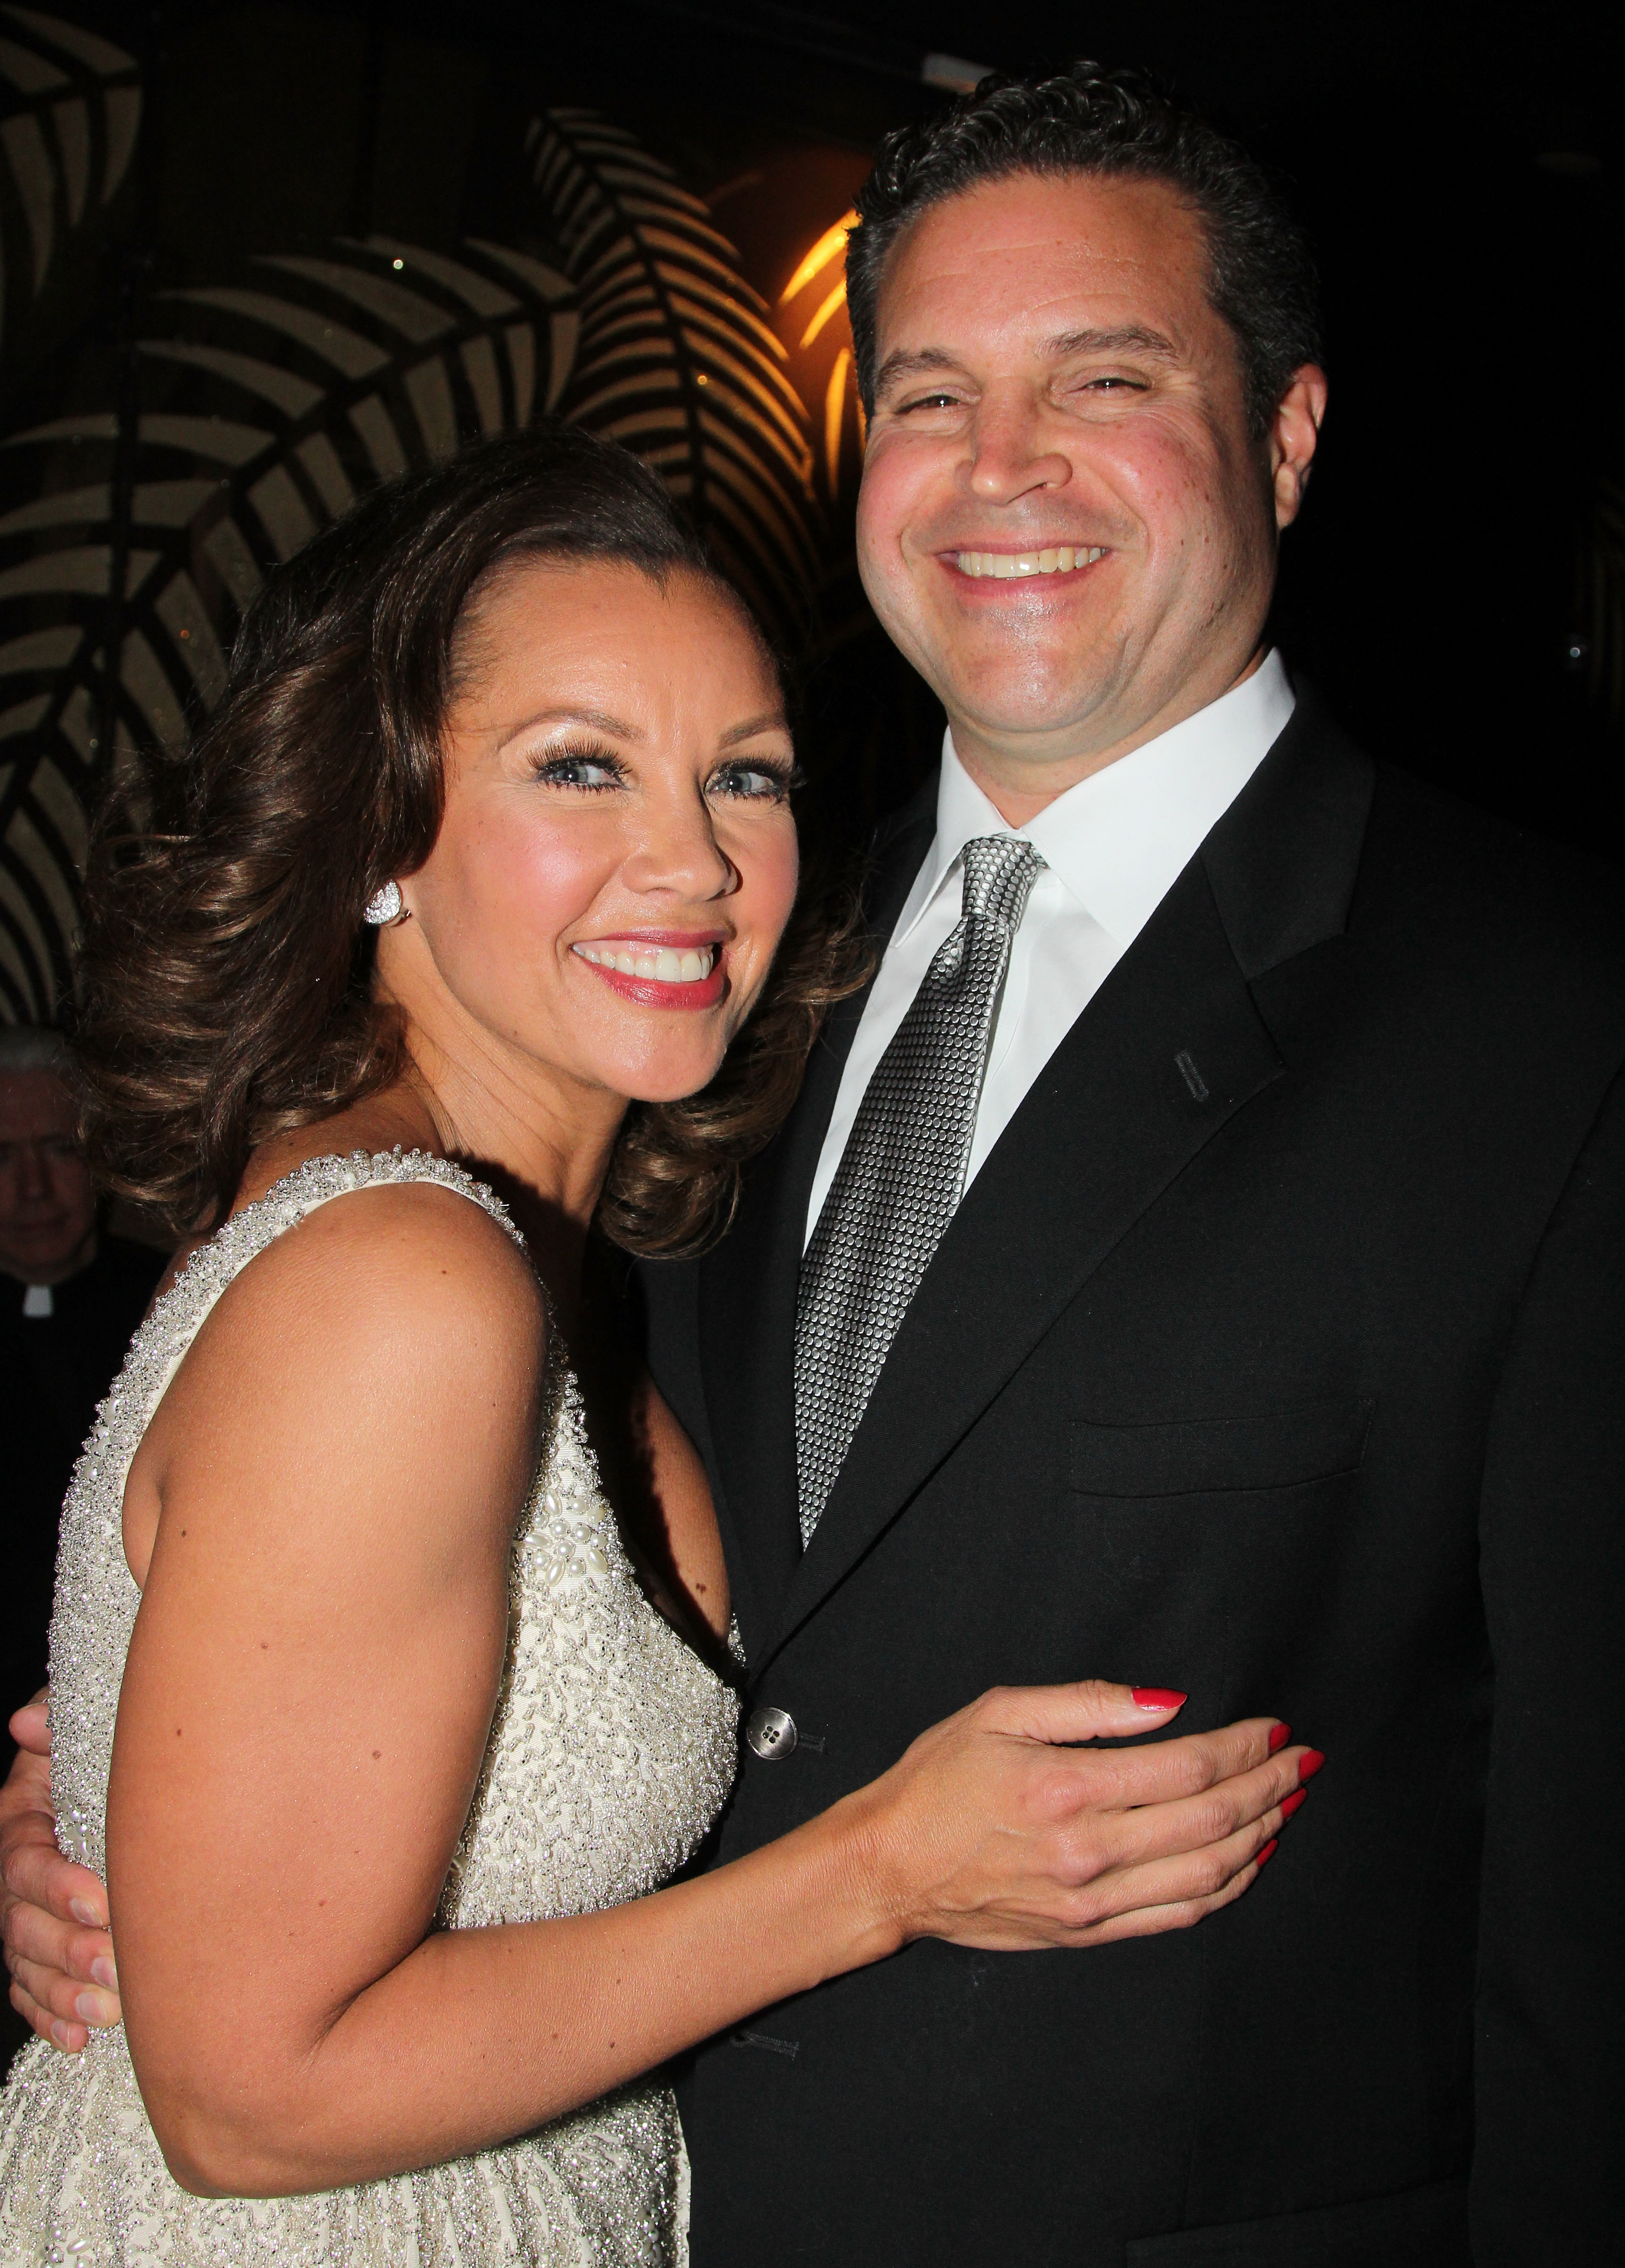 Vanessa Williams and her boyfriend Jim Skrip at the after party for the Broadway opening night of "The Trip To Bountiful" on April 23, 2013, in New York City | Source: Getty Images